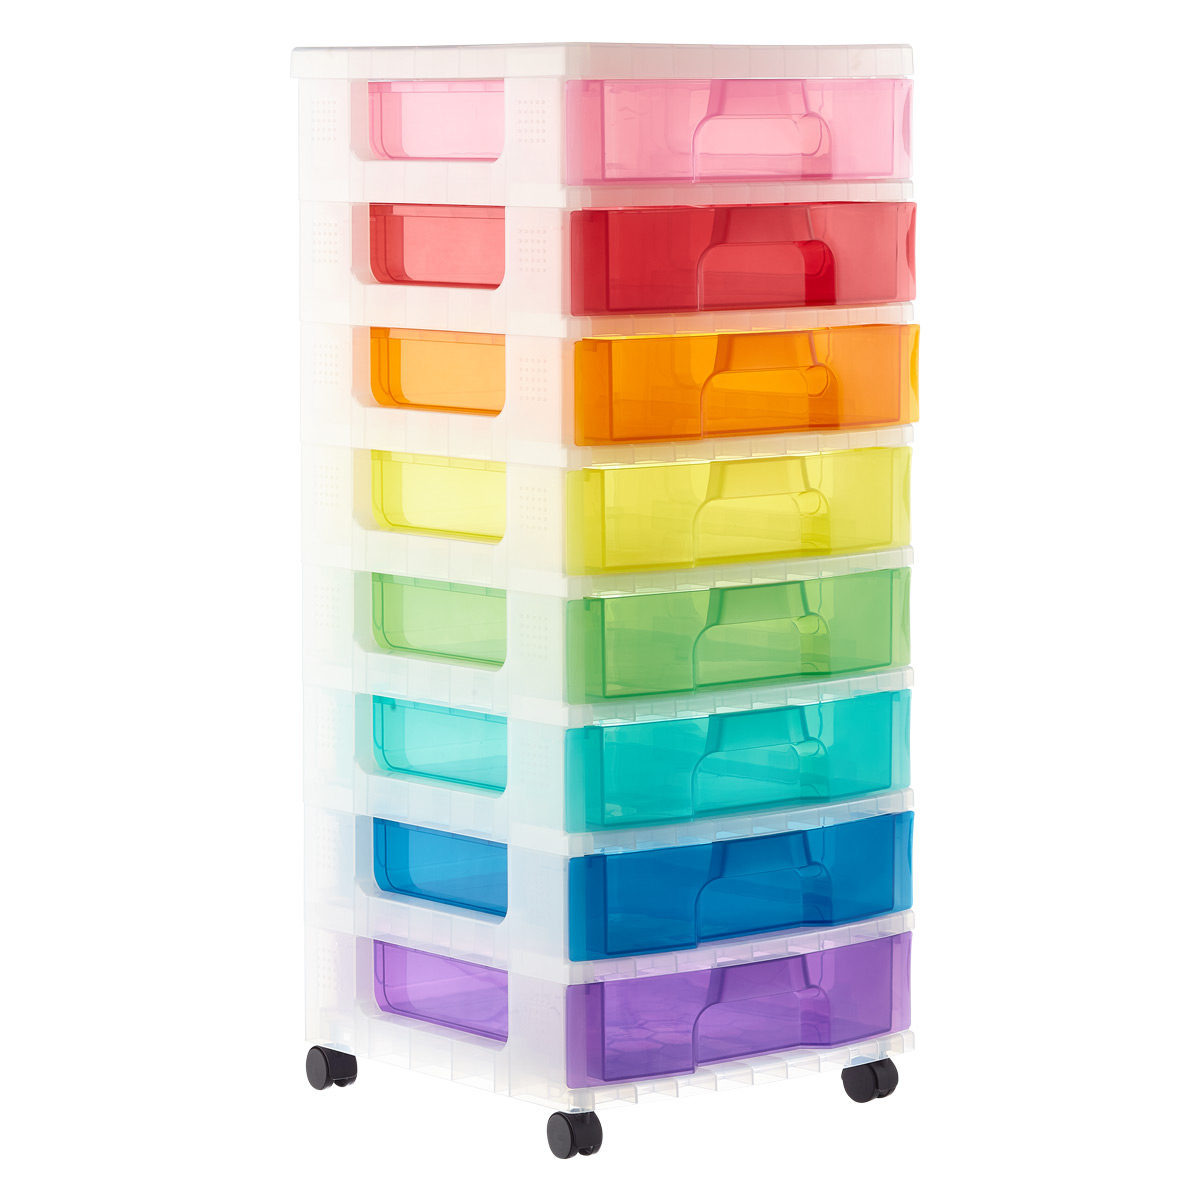 https://www.containerstore.com/catalogimages/424134/10083381_8-Drawer_Rolling_Chest_Rain.jpg